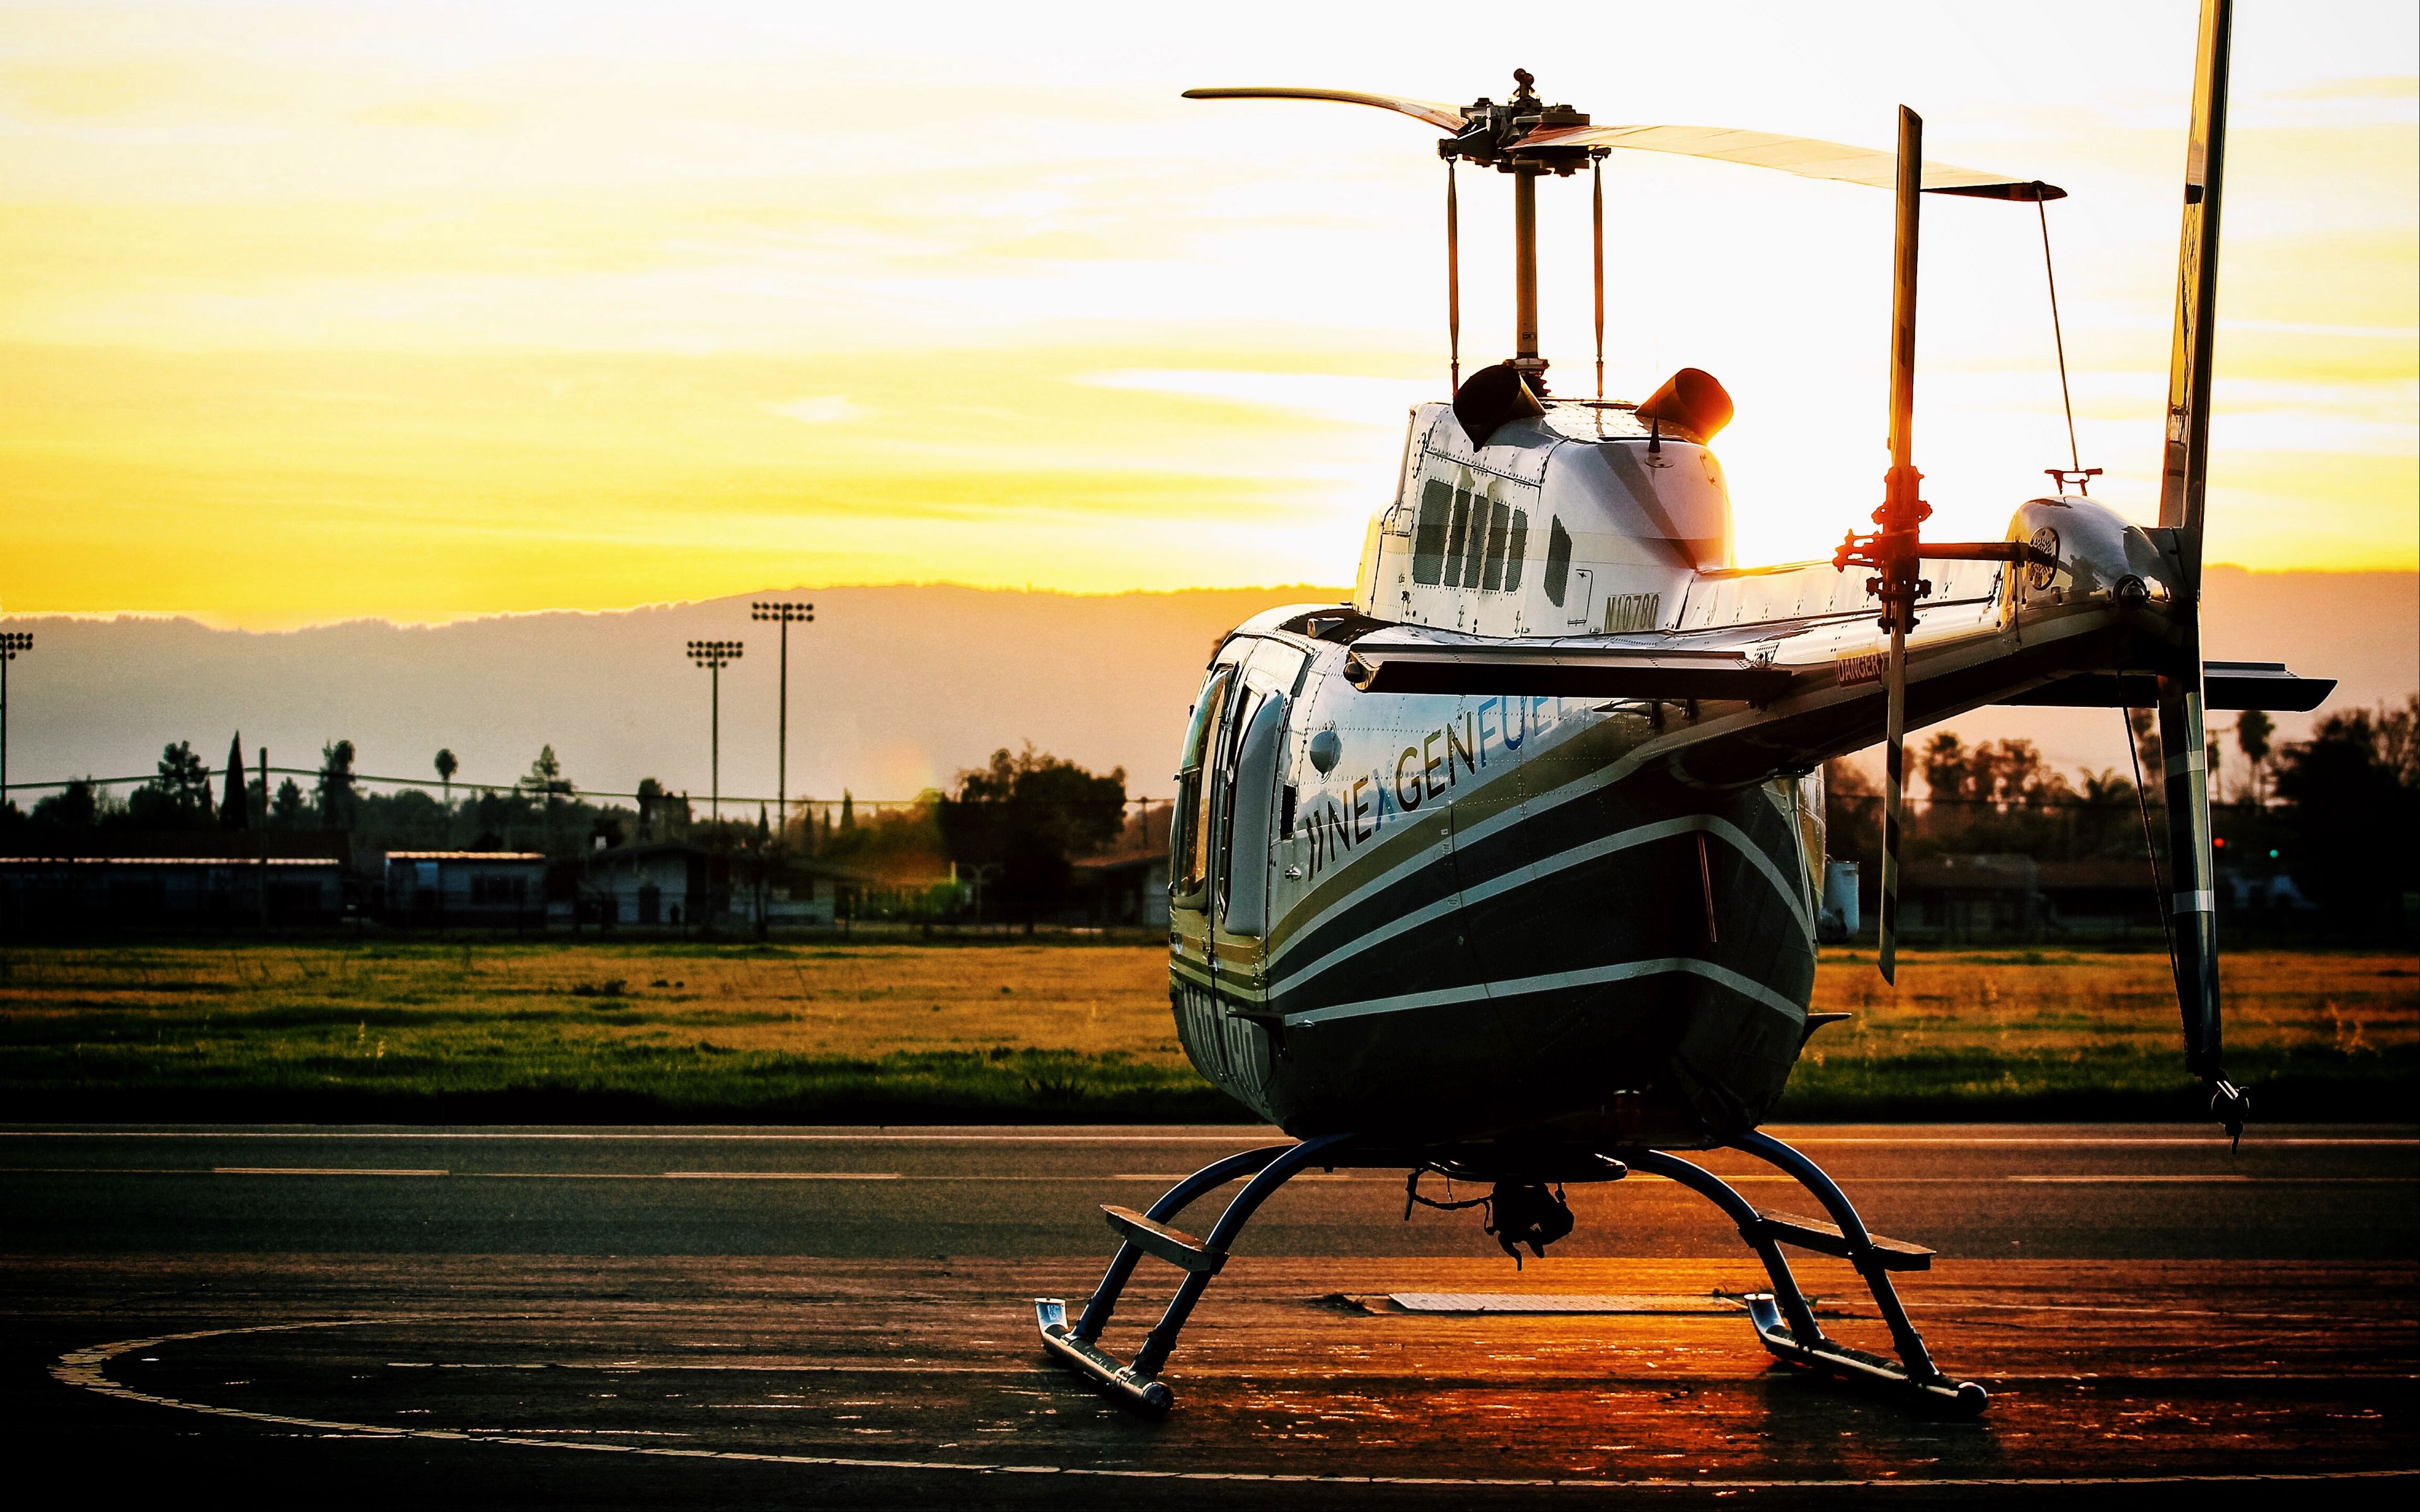 Download wallpaper 3840x2400 helicopter, sunset, airfield 4k ultra hd 16:10  hd background